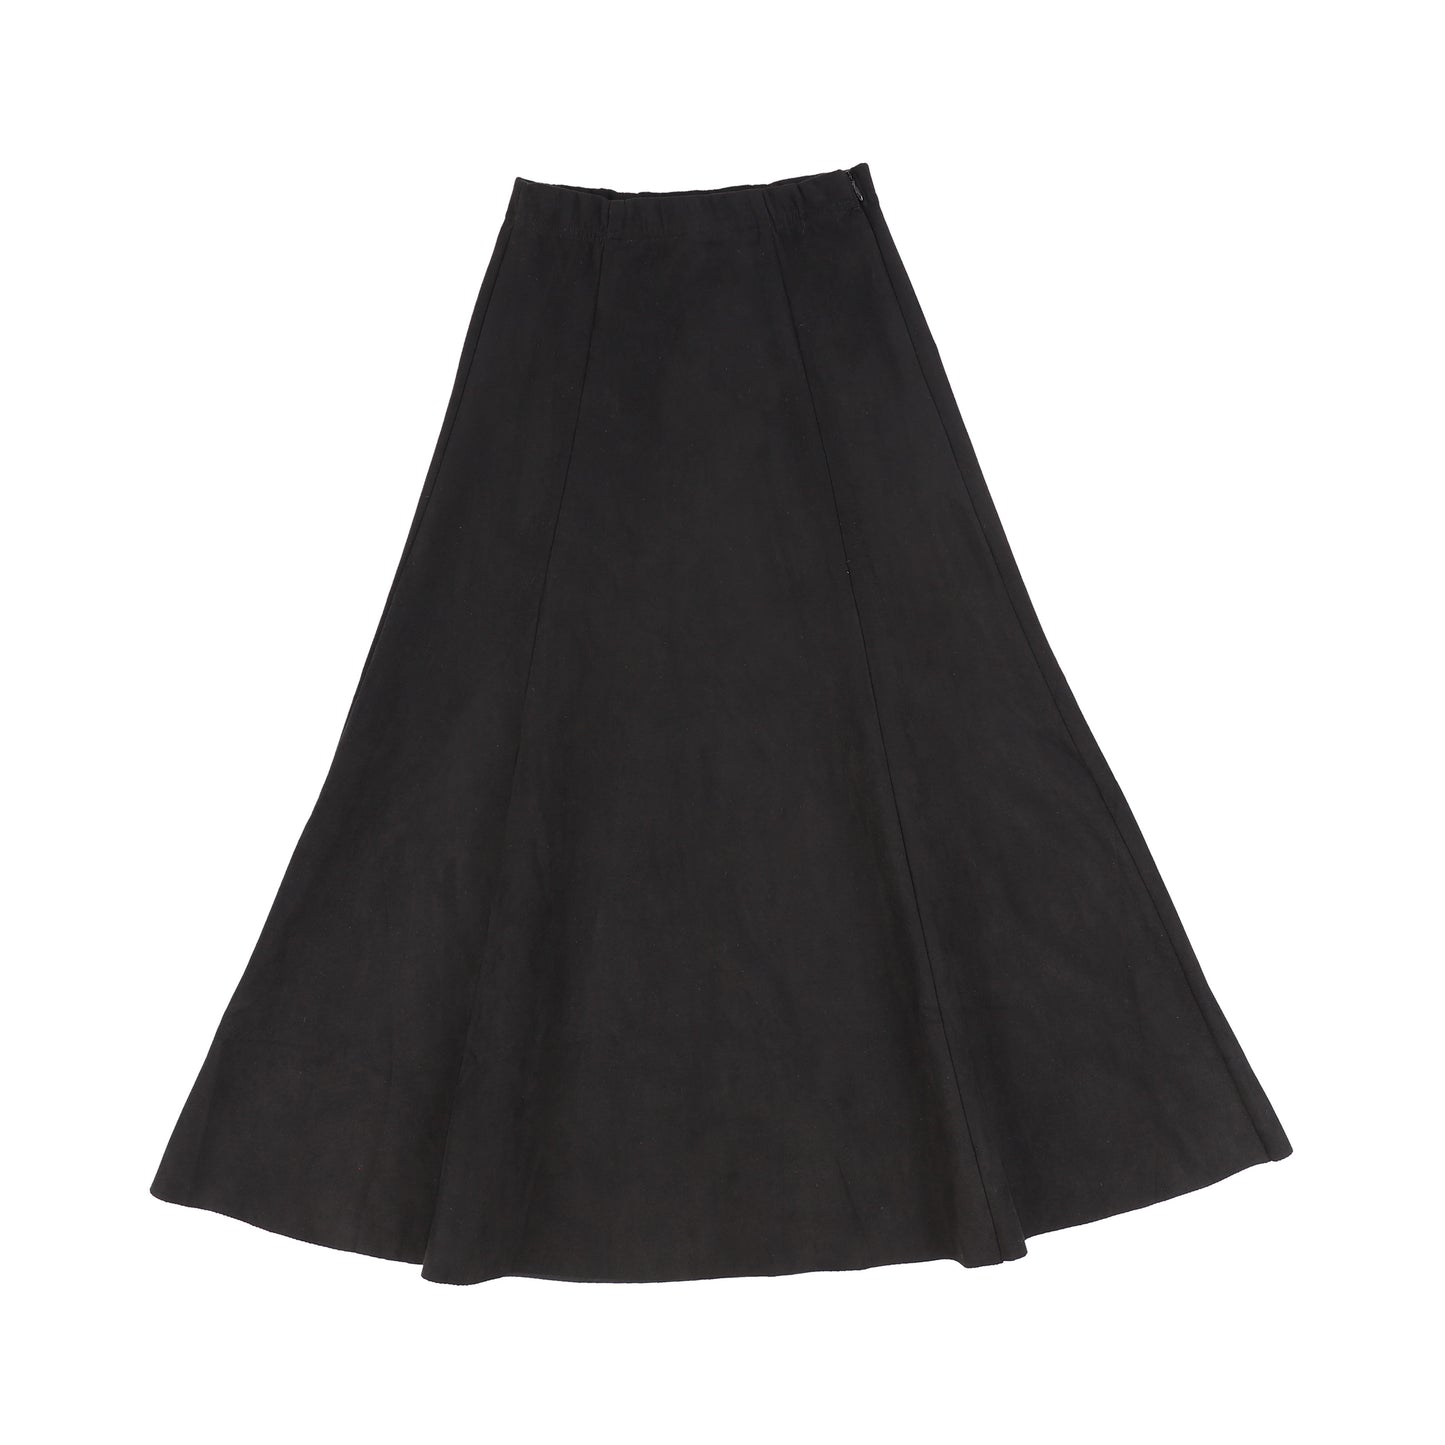 BAMBOO BLACK SUEDE PANELED SKIRT [Final Sale]